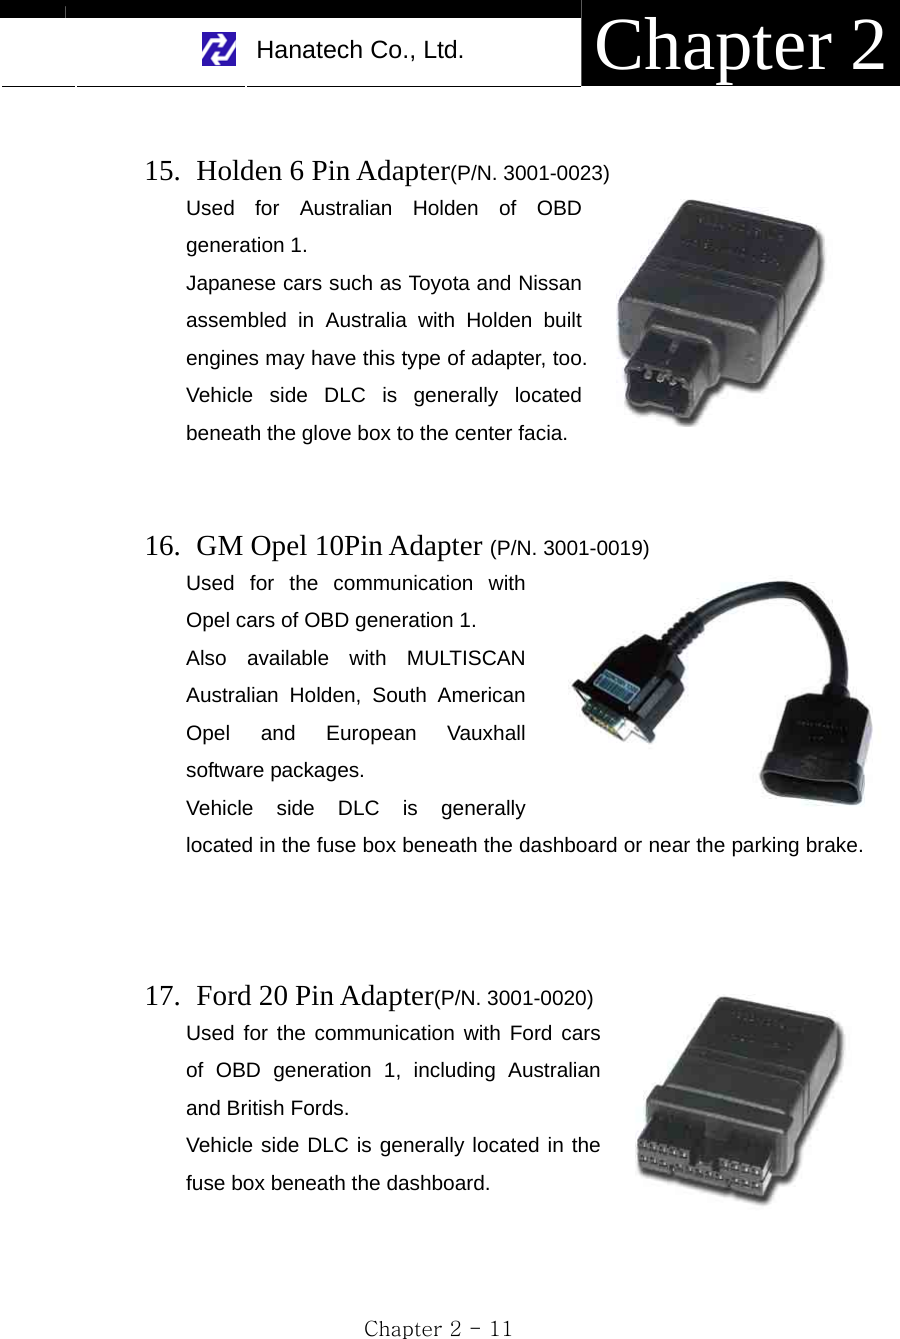     Hanatech Co., Ltd.  Chapter 2 Chapter 2 - 11  15.   Holden 6 Pin Adapter(P/N. 3001-0023) Used for Australian Holden of OBD generation 1. Japanese cars such as Toyota and Nissan assembled in Australia with Holden built engines may have this type of adapter, too. Vehicle side DLC is generally located beneath the glove box to the center facia.   16.   GM Opel 10Pin Adapter (P/N. 3001-0019) Used for the communication with Opel cars of OBD generation 1. Also available with MULTISCAN Australian Holden, South American Opel and European Vauxhall software packages.   Vehicle side DLC is generally located in the fuse box beneath the dashboard or near the parking brake.     17.  Ford 20 Pin Adapter(P/N. 3001-0020) Used for the communication with Ford cars of OBD generation 1, including Australian and British Fords. Vehicle side DLC is generally located in the fuse box beneath the dashboard.   